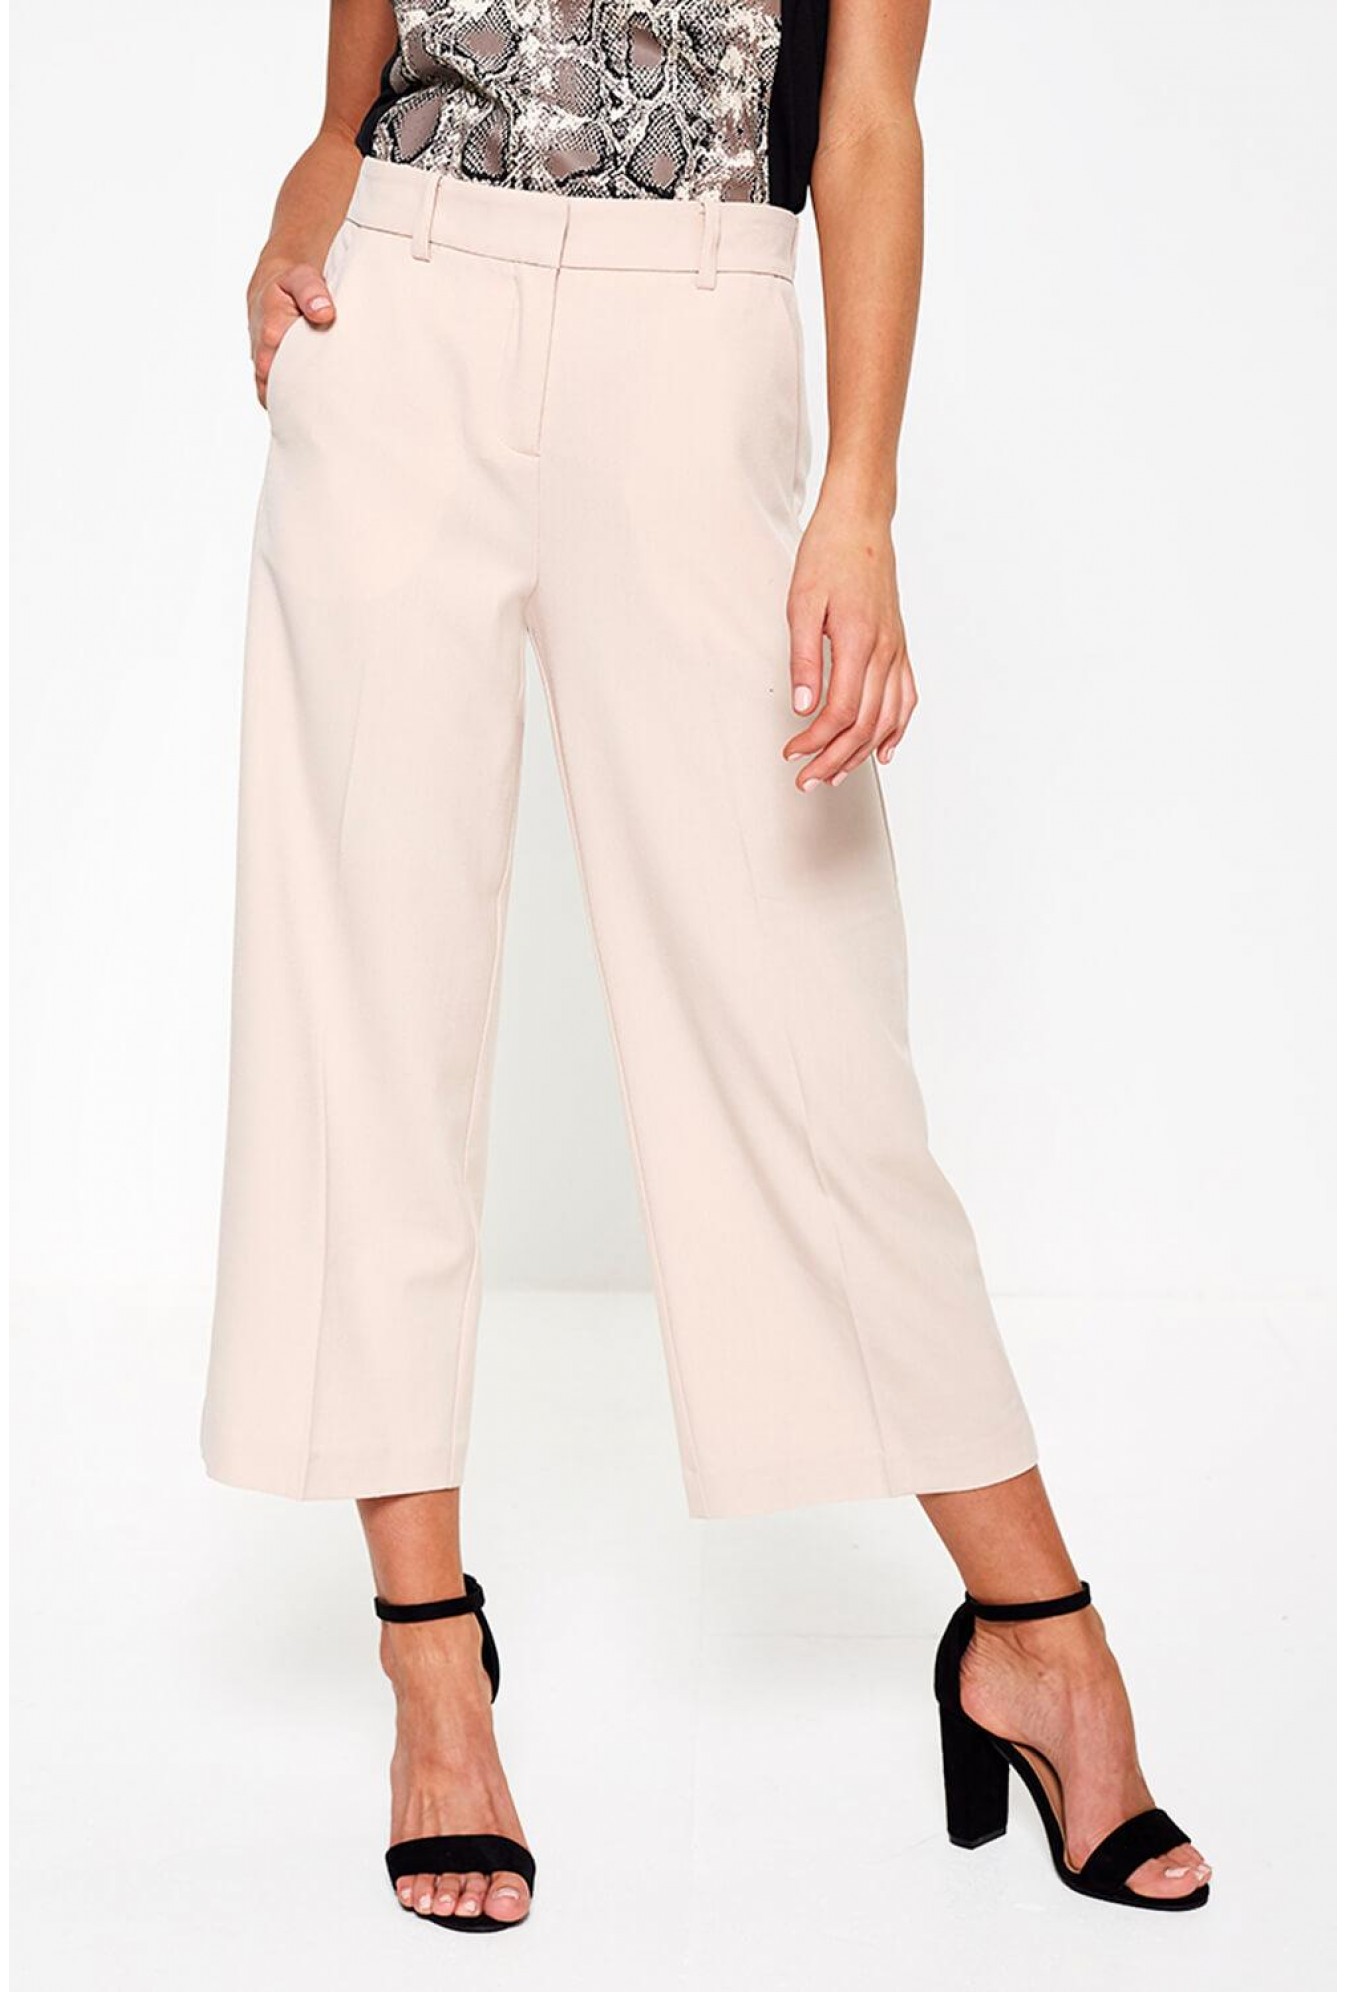 B.Young Danta Wide Leg Cropped Trousers in Beige | iCLOTHING